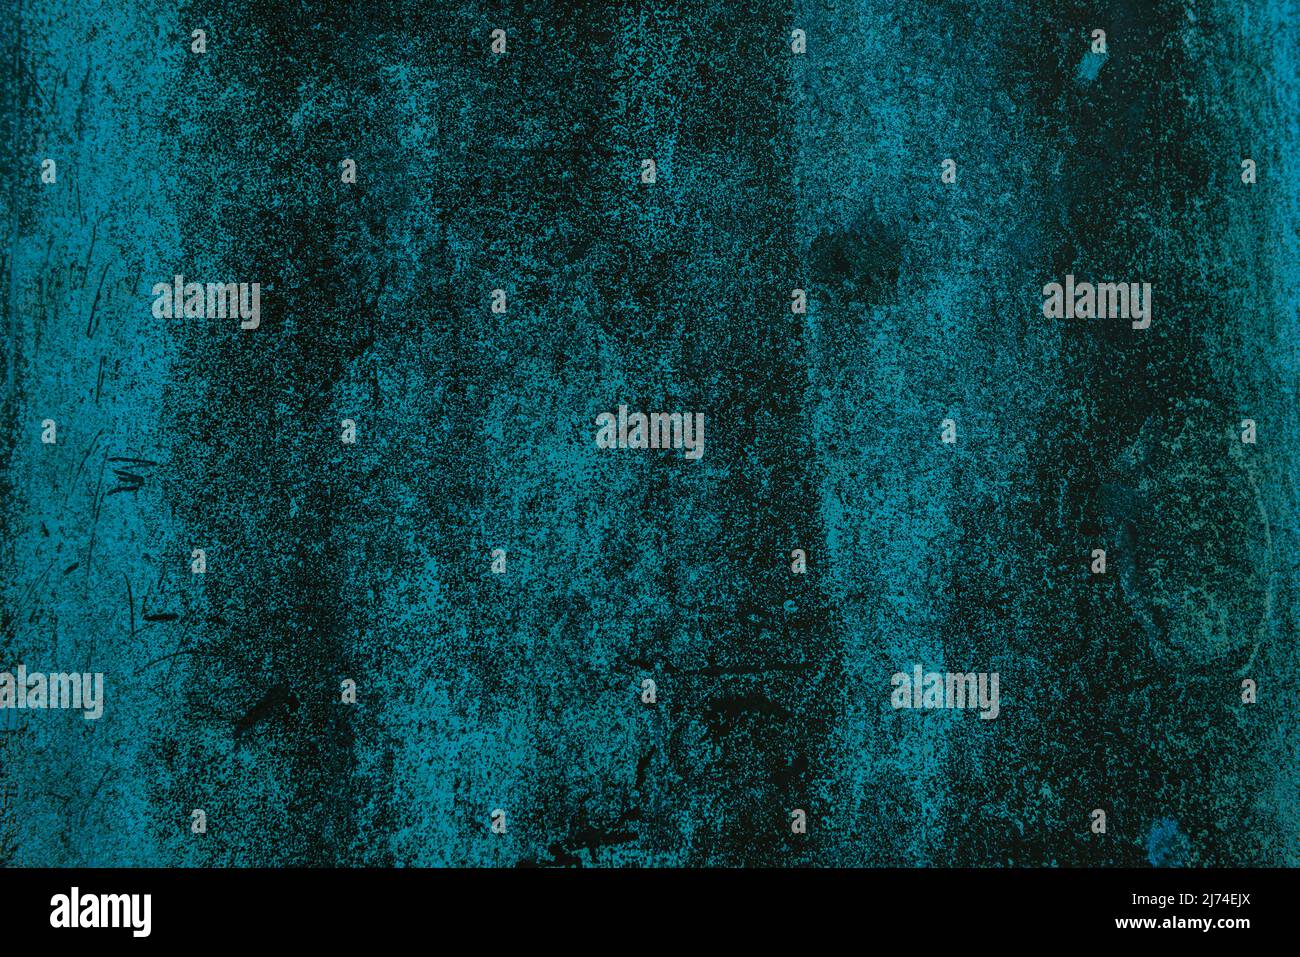 Dark turquoise background with abstract chaotic pattern. Stock Photo